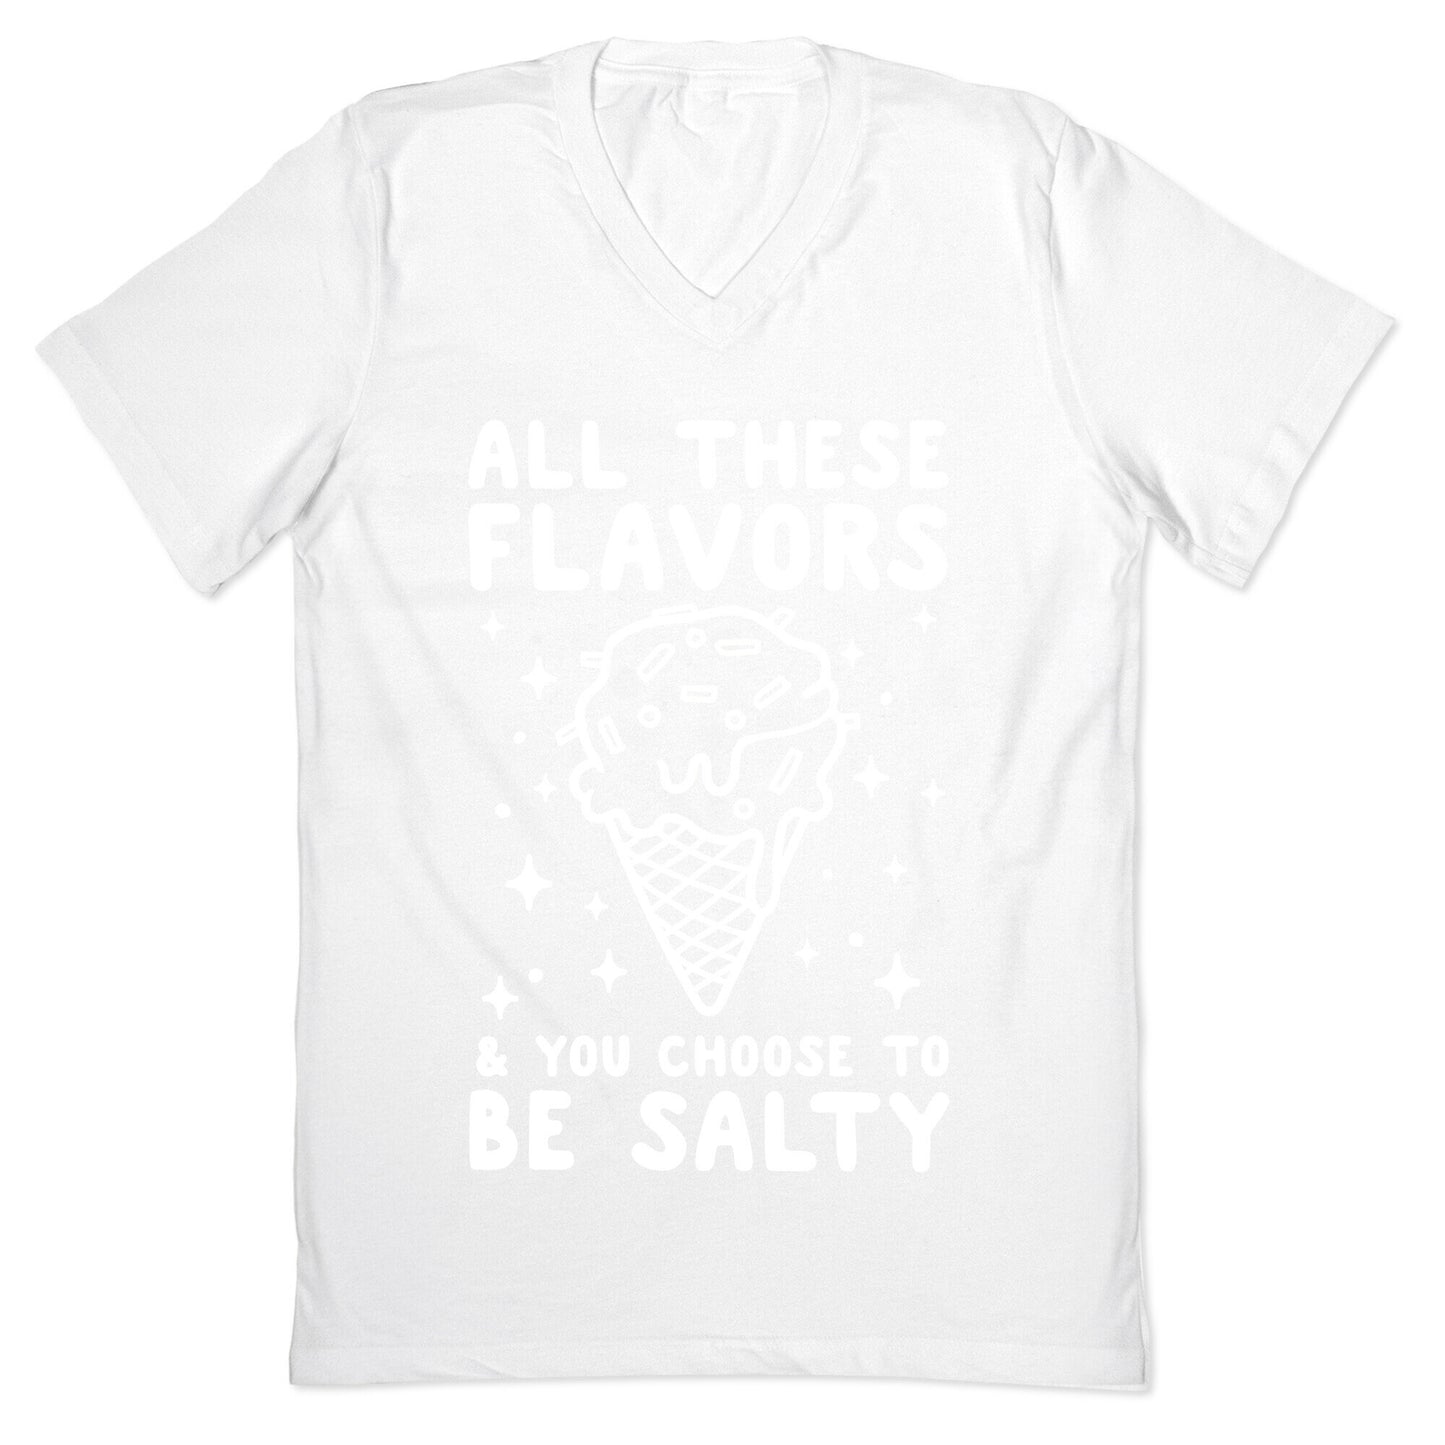 All These Flavors And You Choose To Be Salty V-Neck